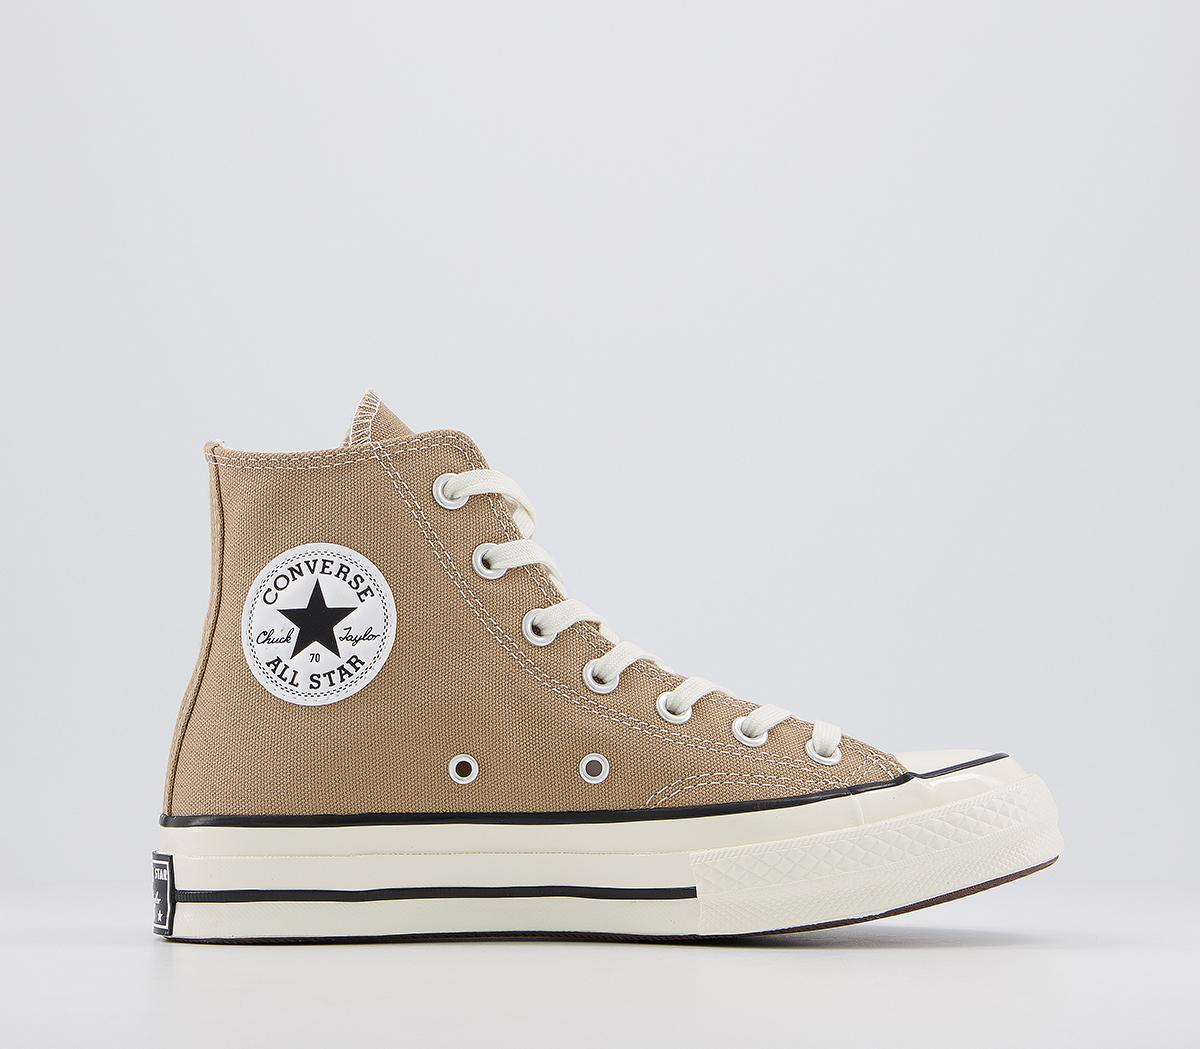 Converse All Star Hi 70s Trainers Nomad 